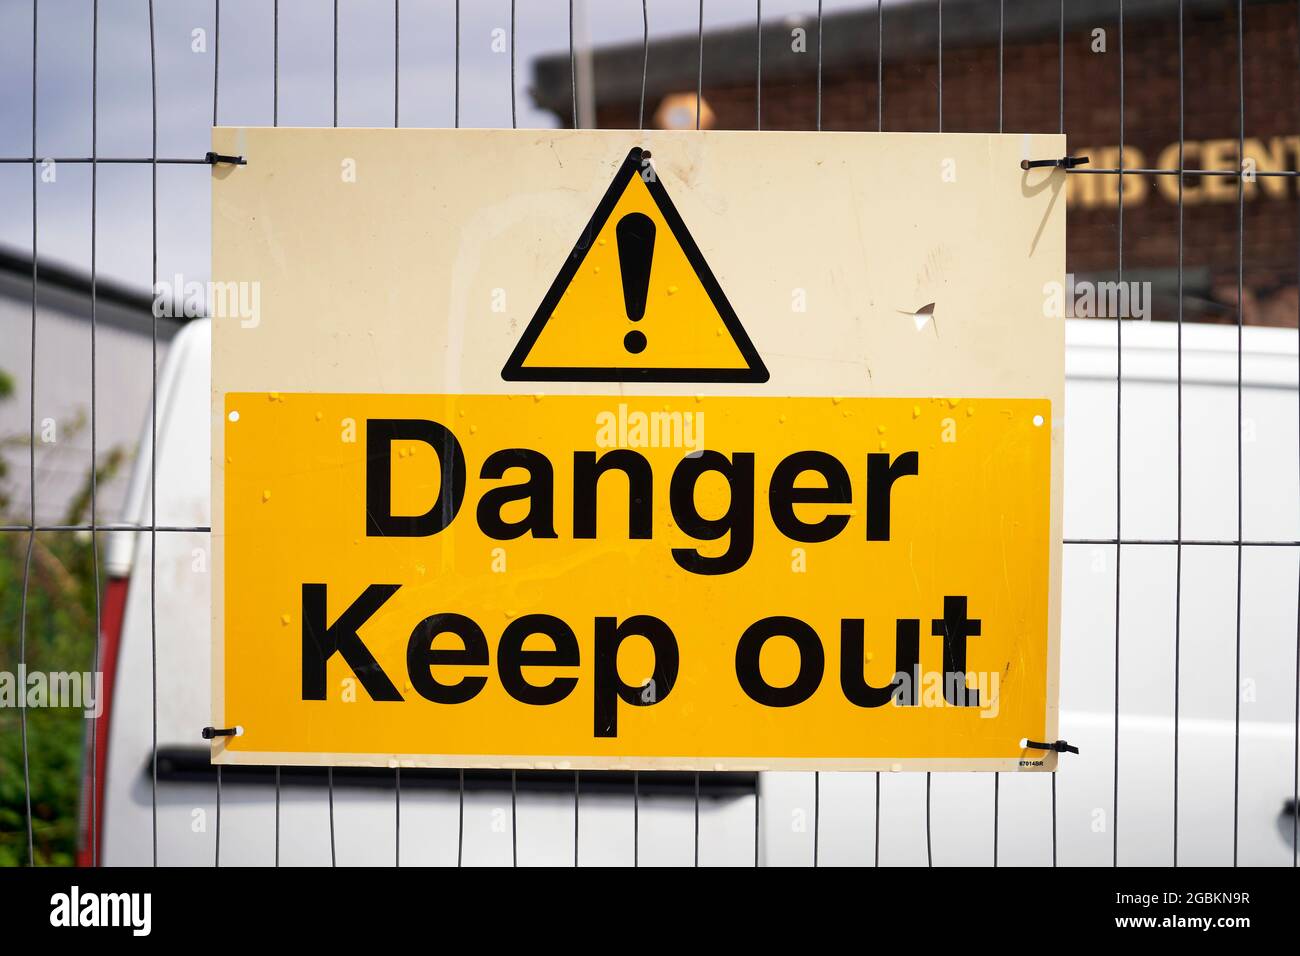 Danger keep out sign attached to a wire fence with cable ties Stock Photo